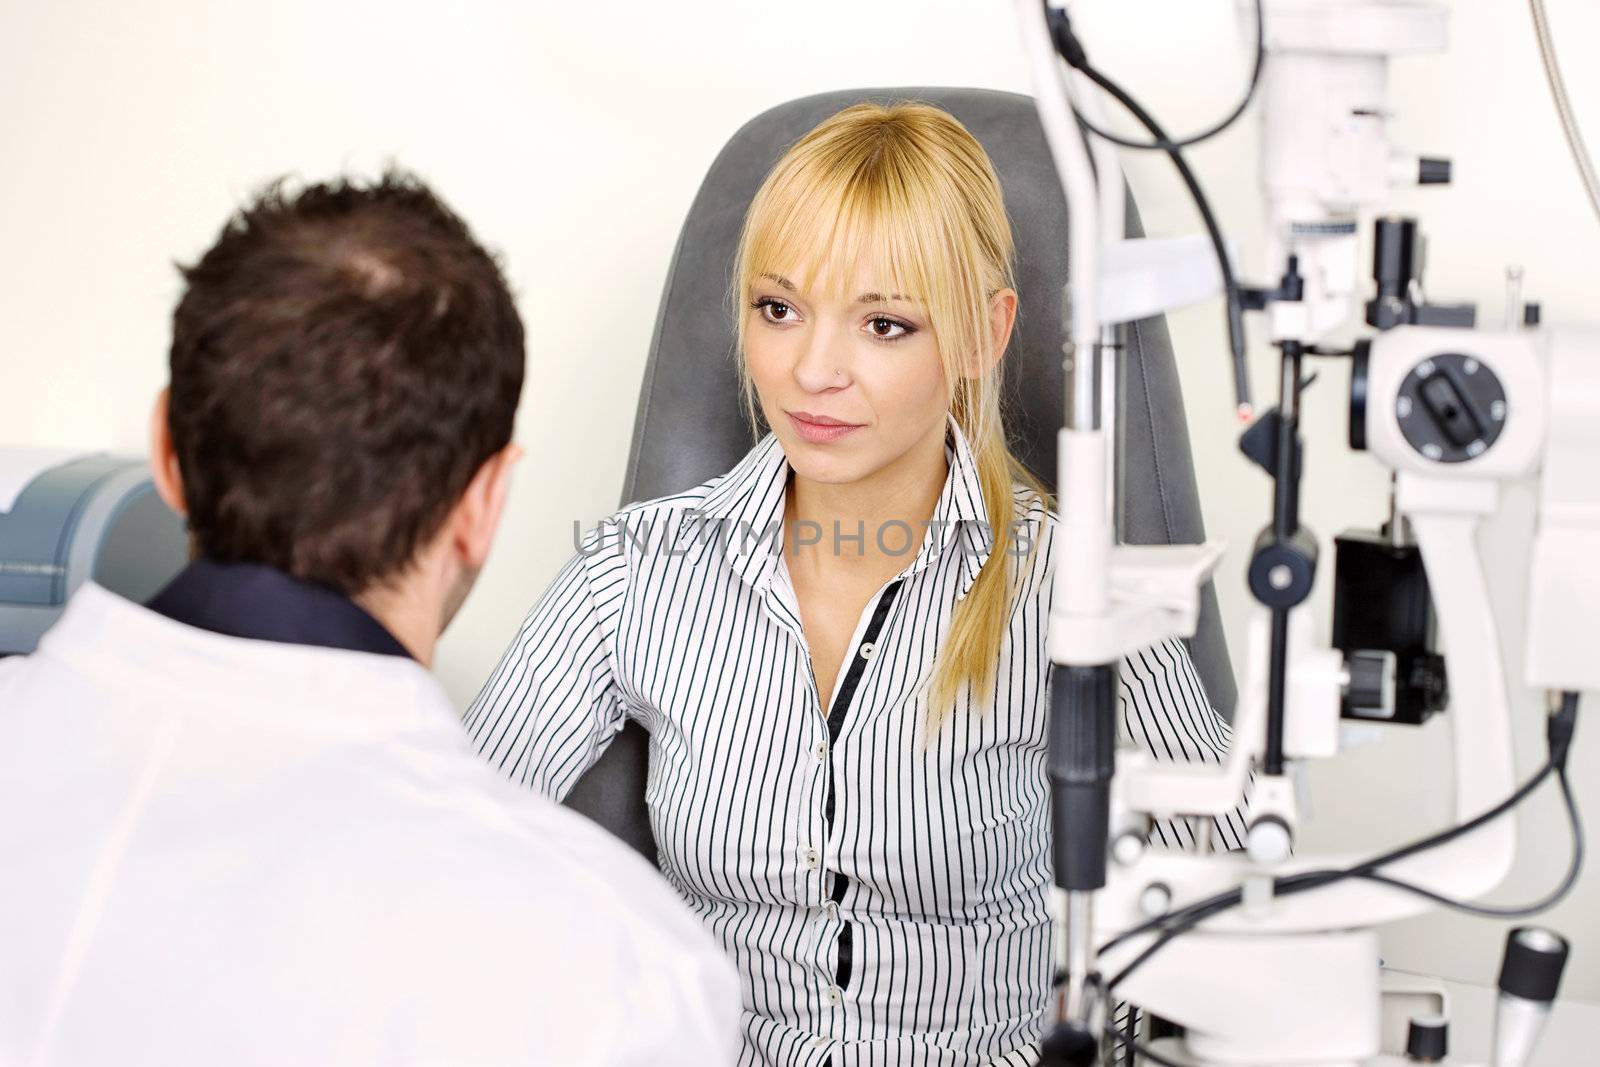 Female patient listening diagnose after medical attendance at the optometrist